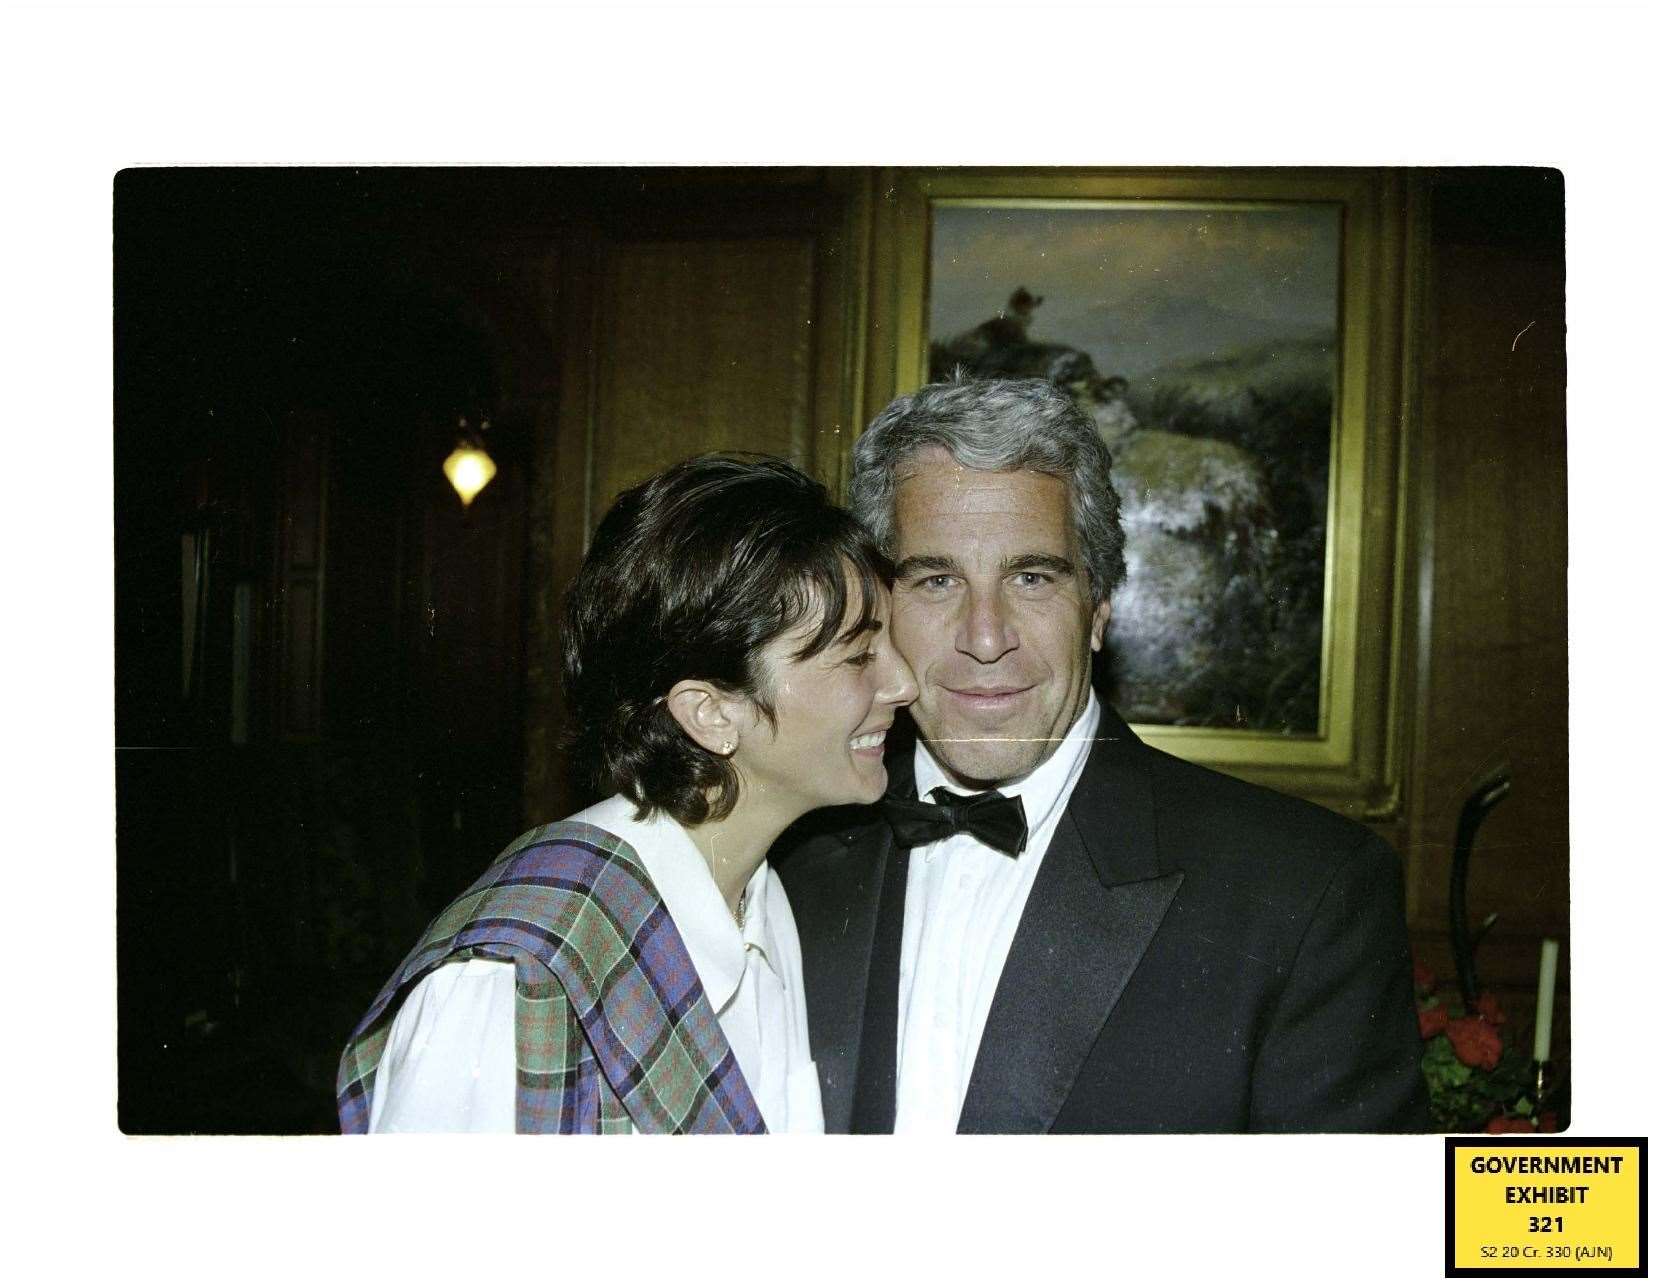 Socialite Ghislaine Maxwell supplied Jeffrey Epstein with underage girls (US Department of Justice/PA)